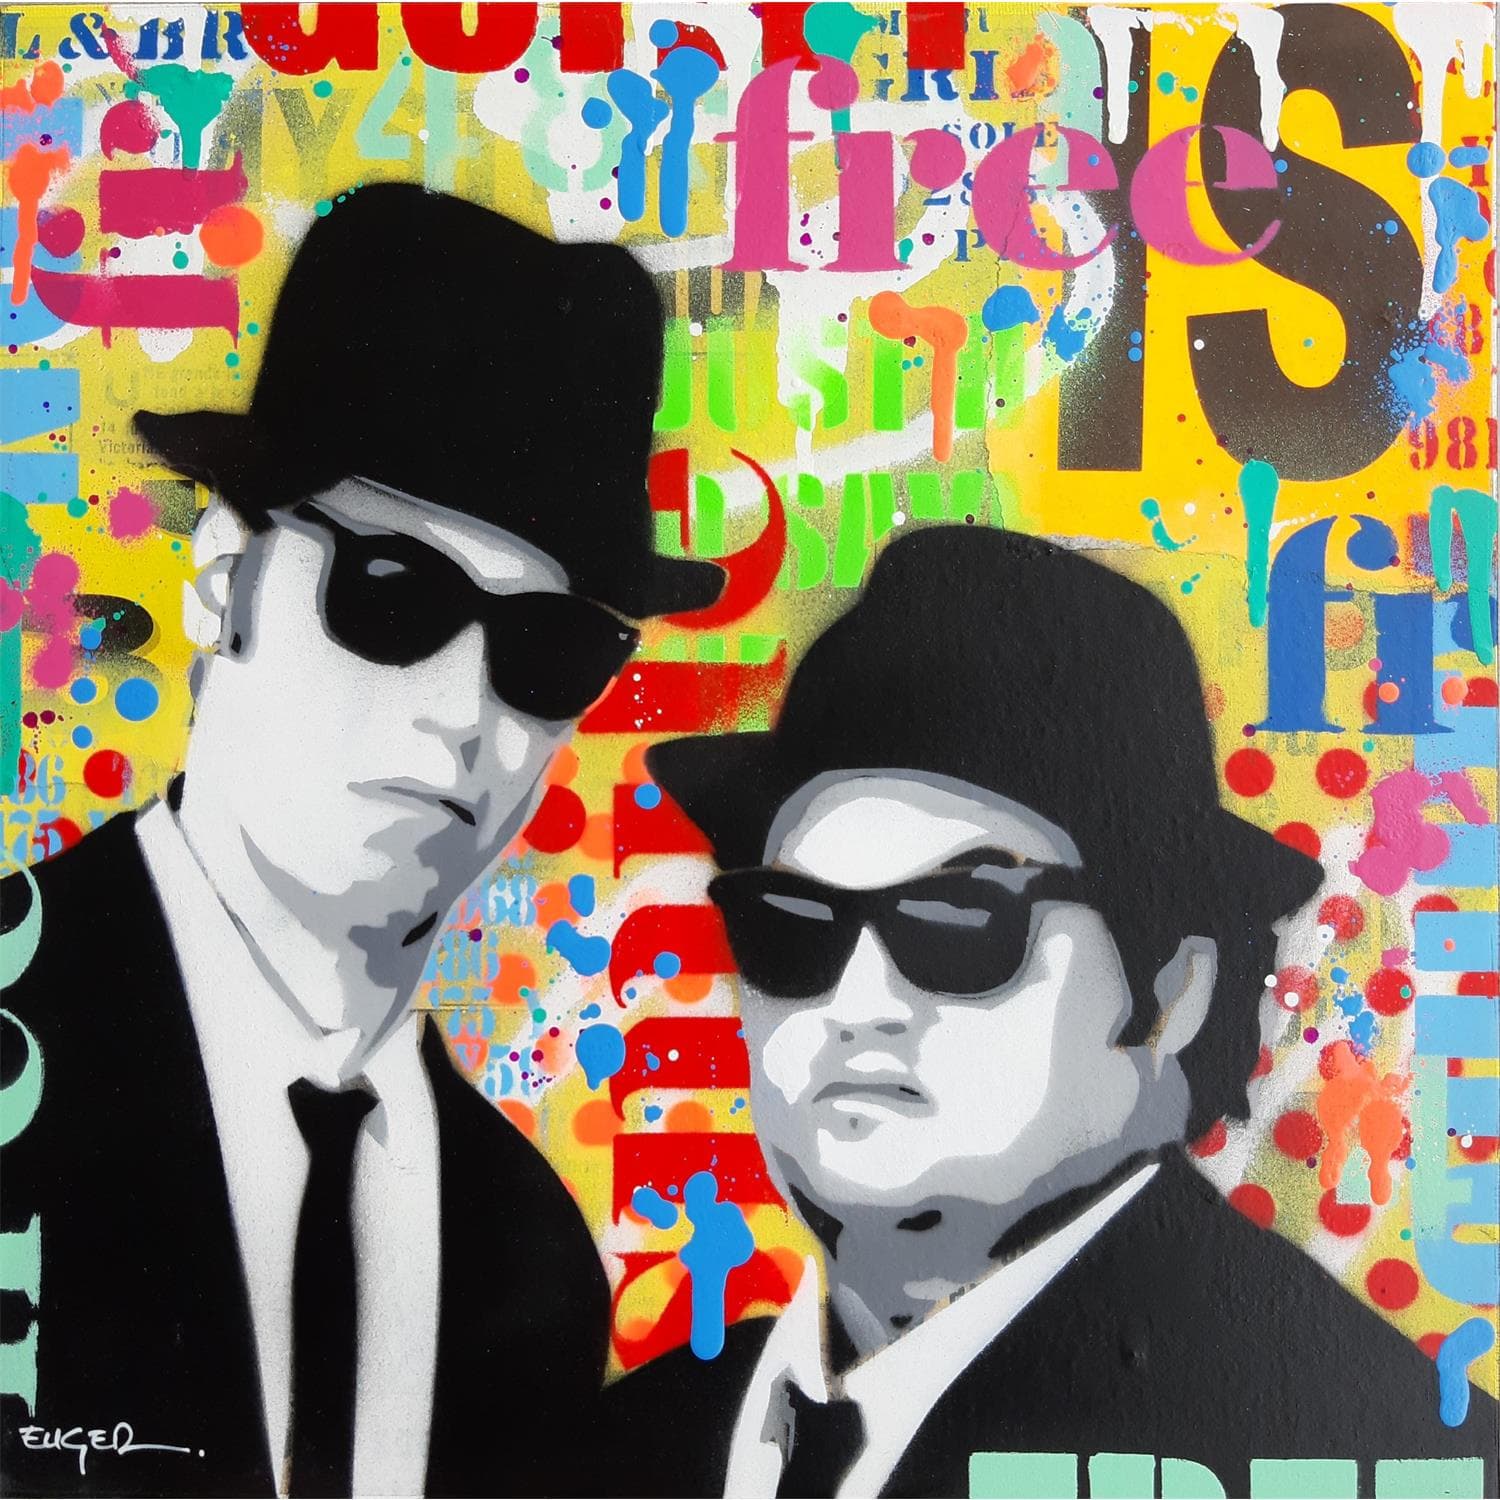 https://cdn.carredartistes.com/products_images/prod_108299/f_36-x-36-cm-philippe-euger-the-blues-brothers-front-0.jpg